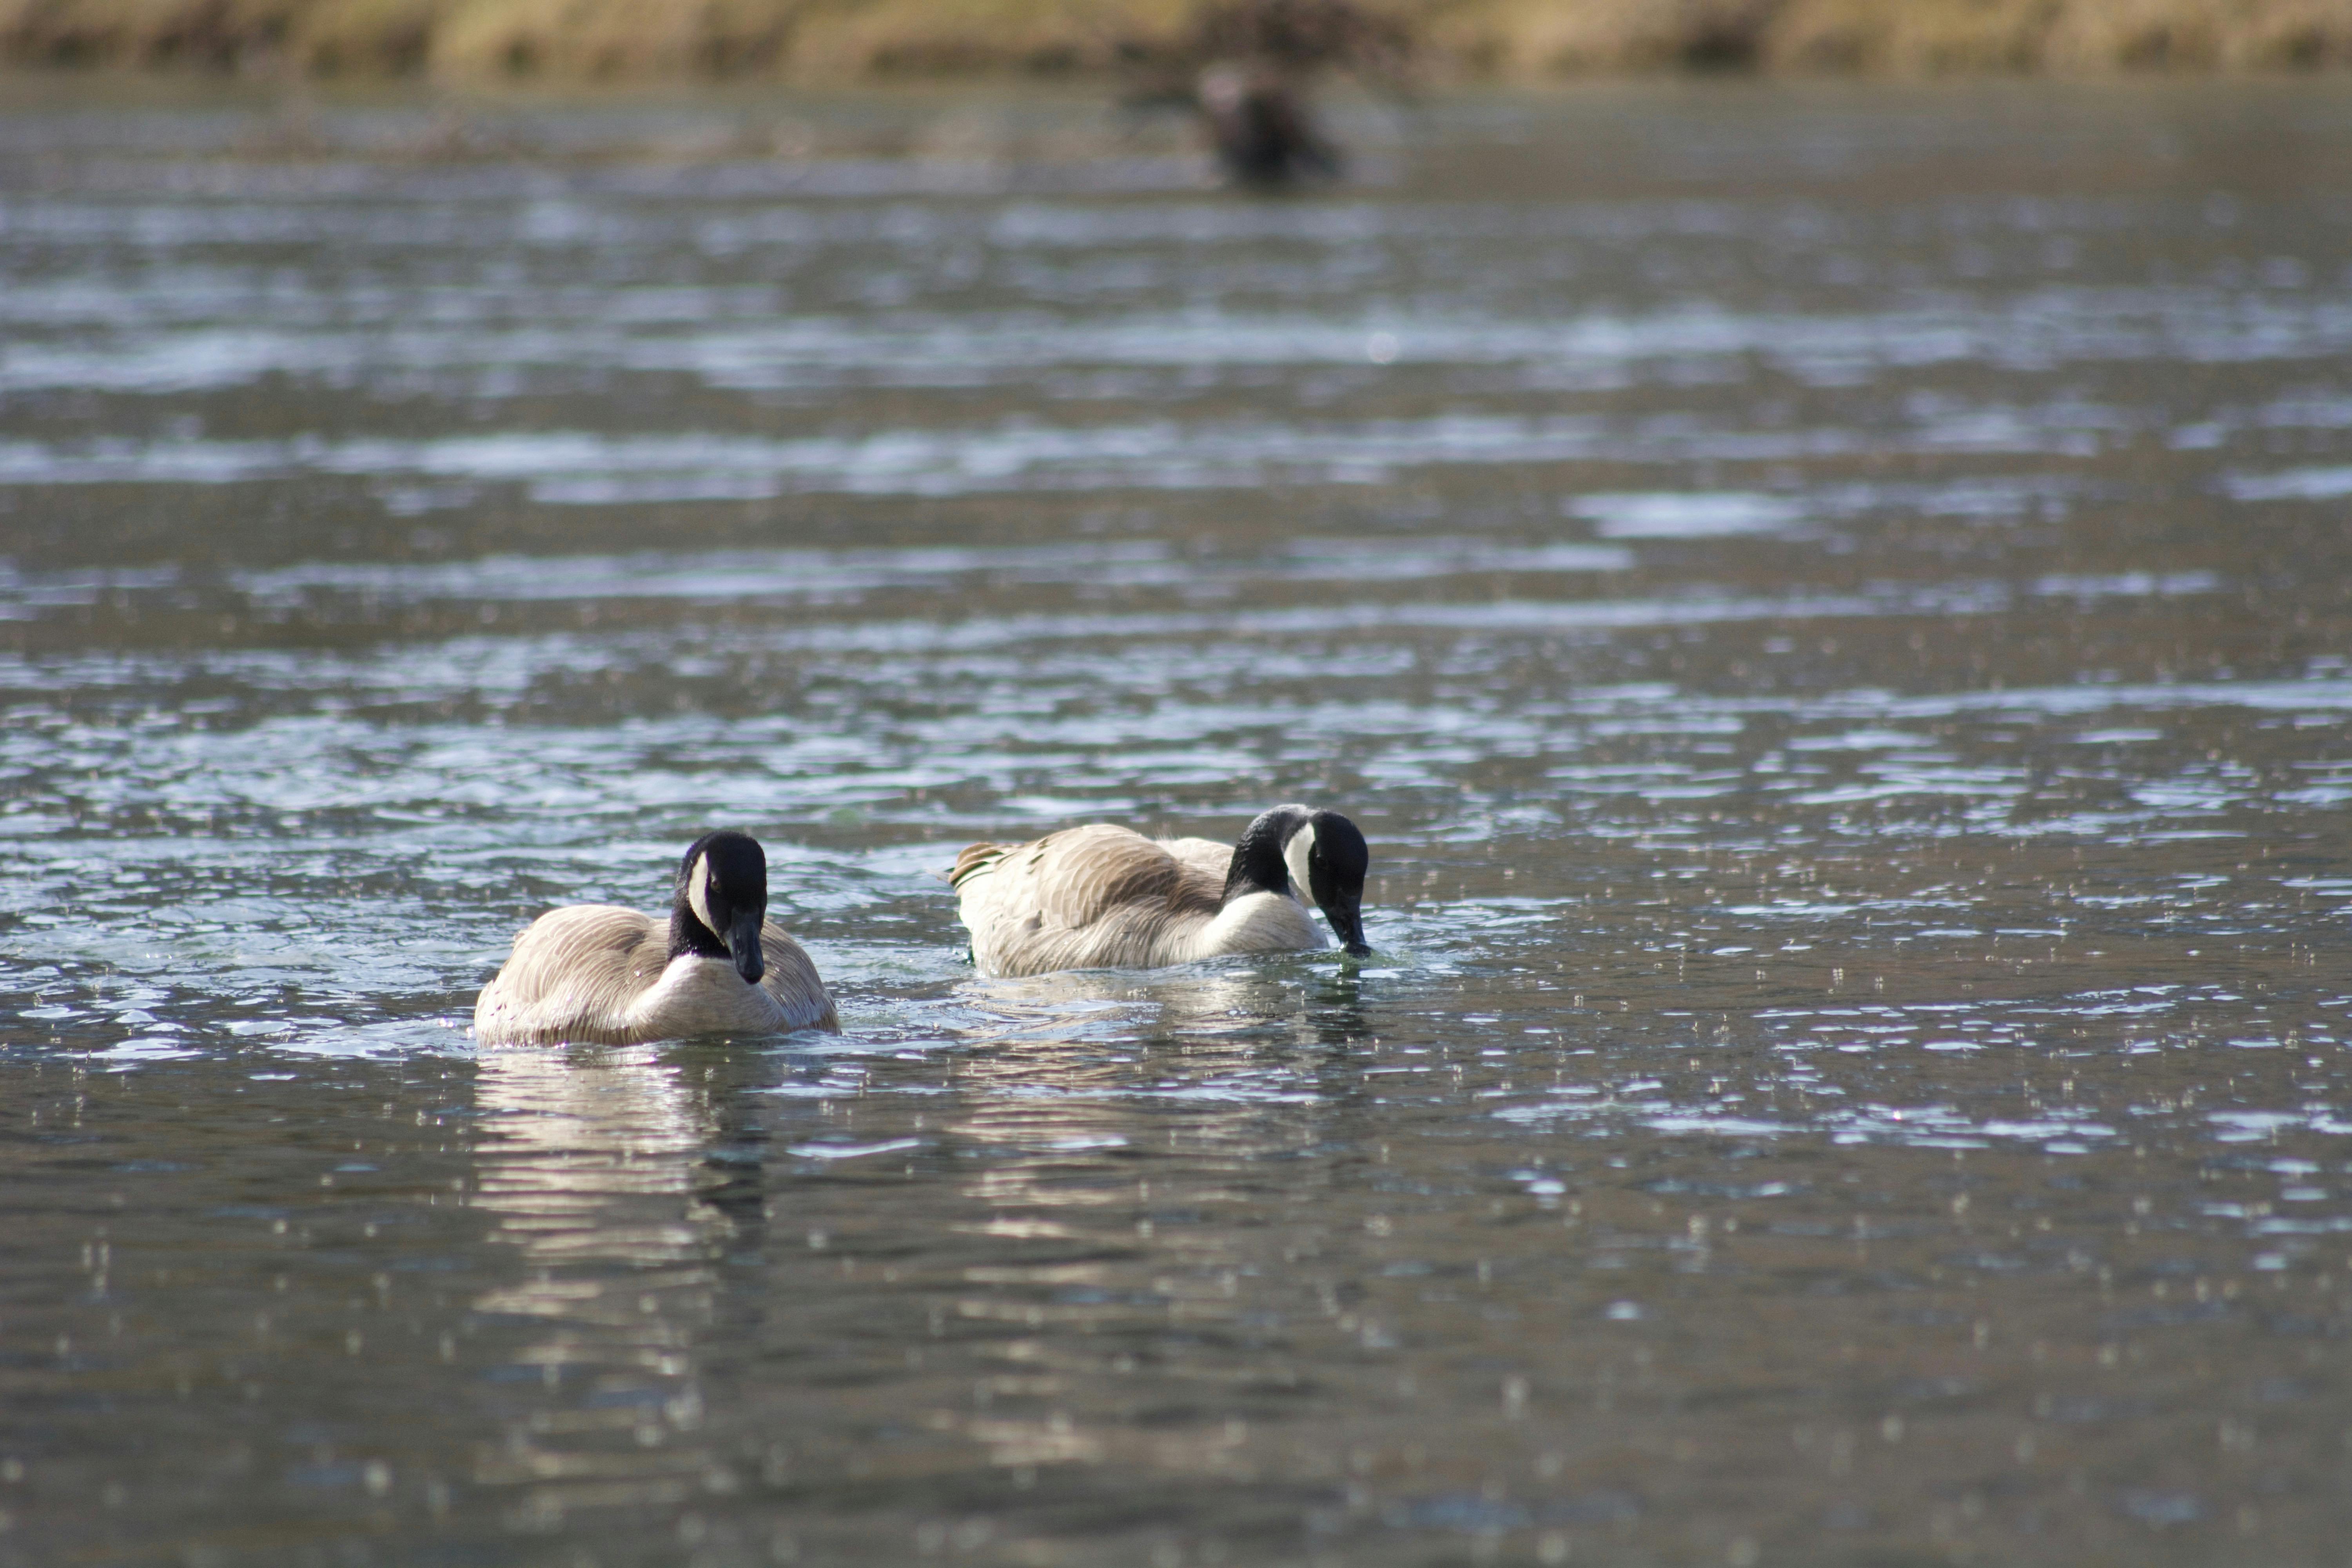 Two Canada geese on the water